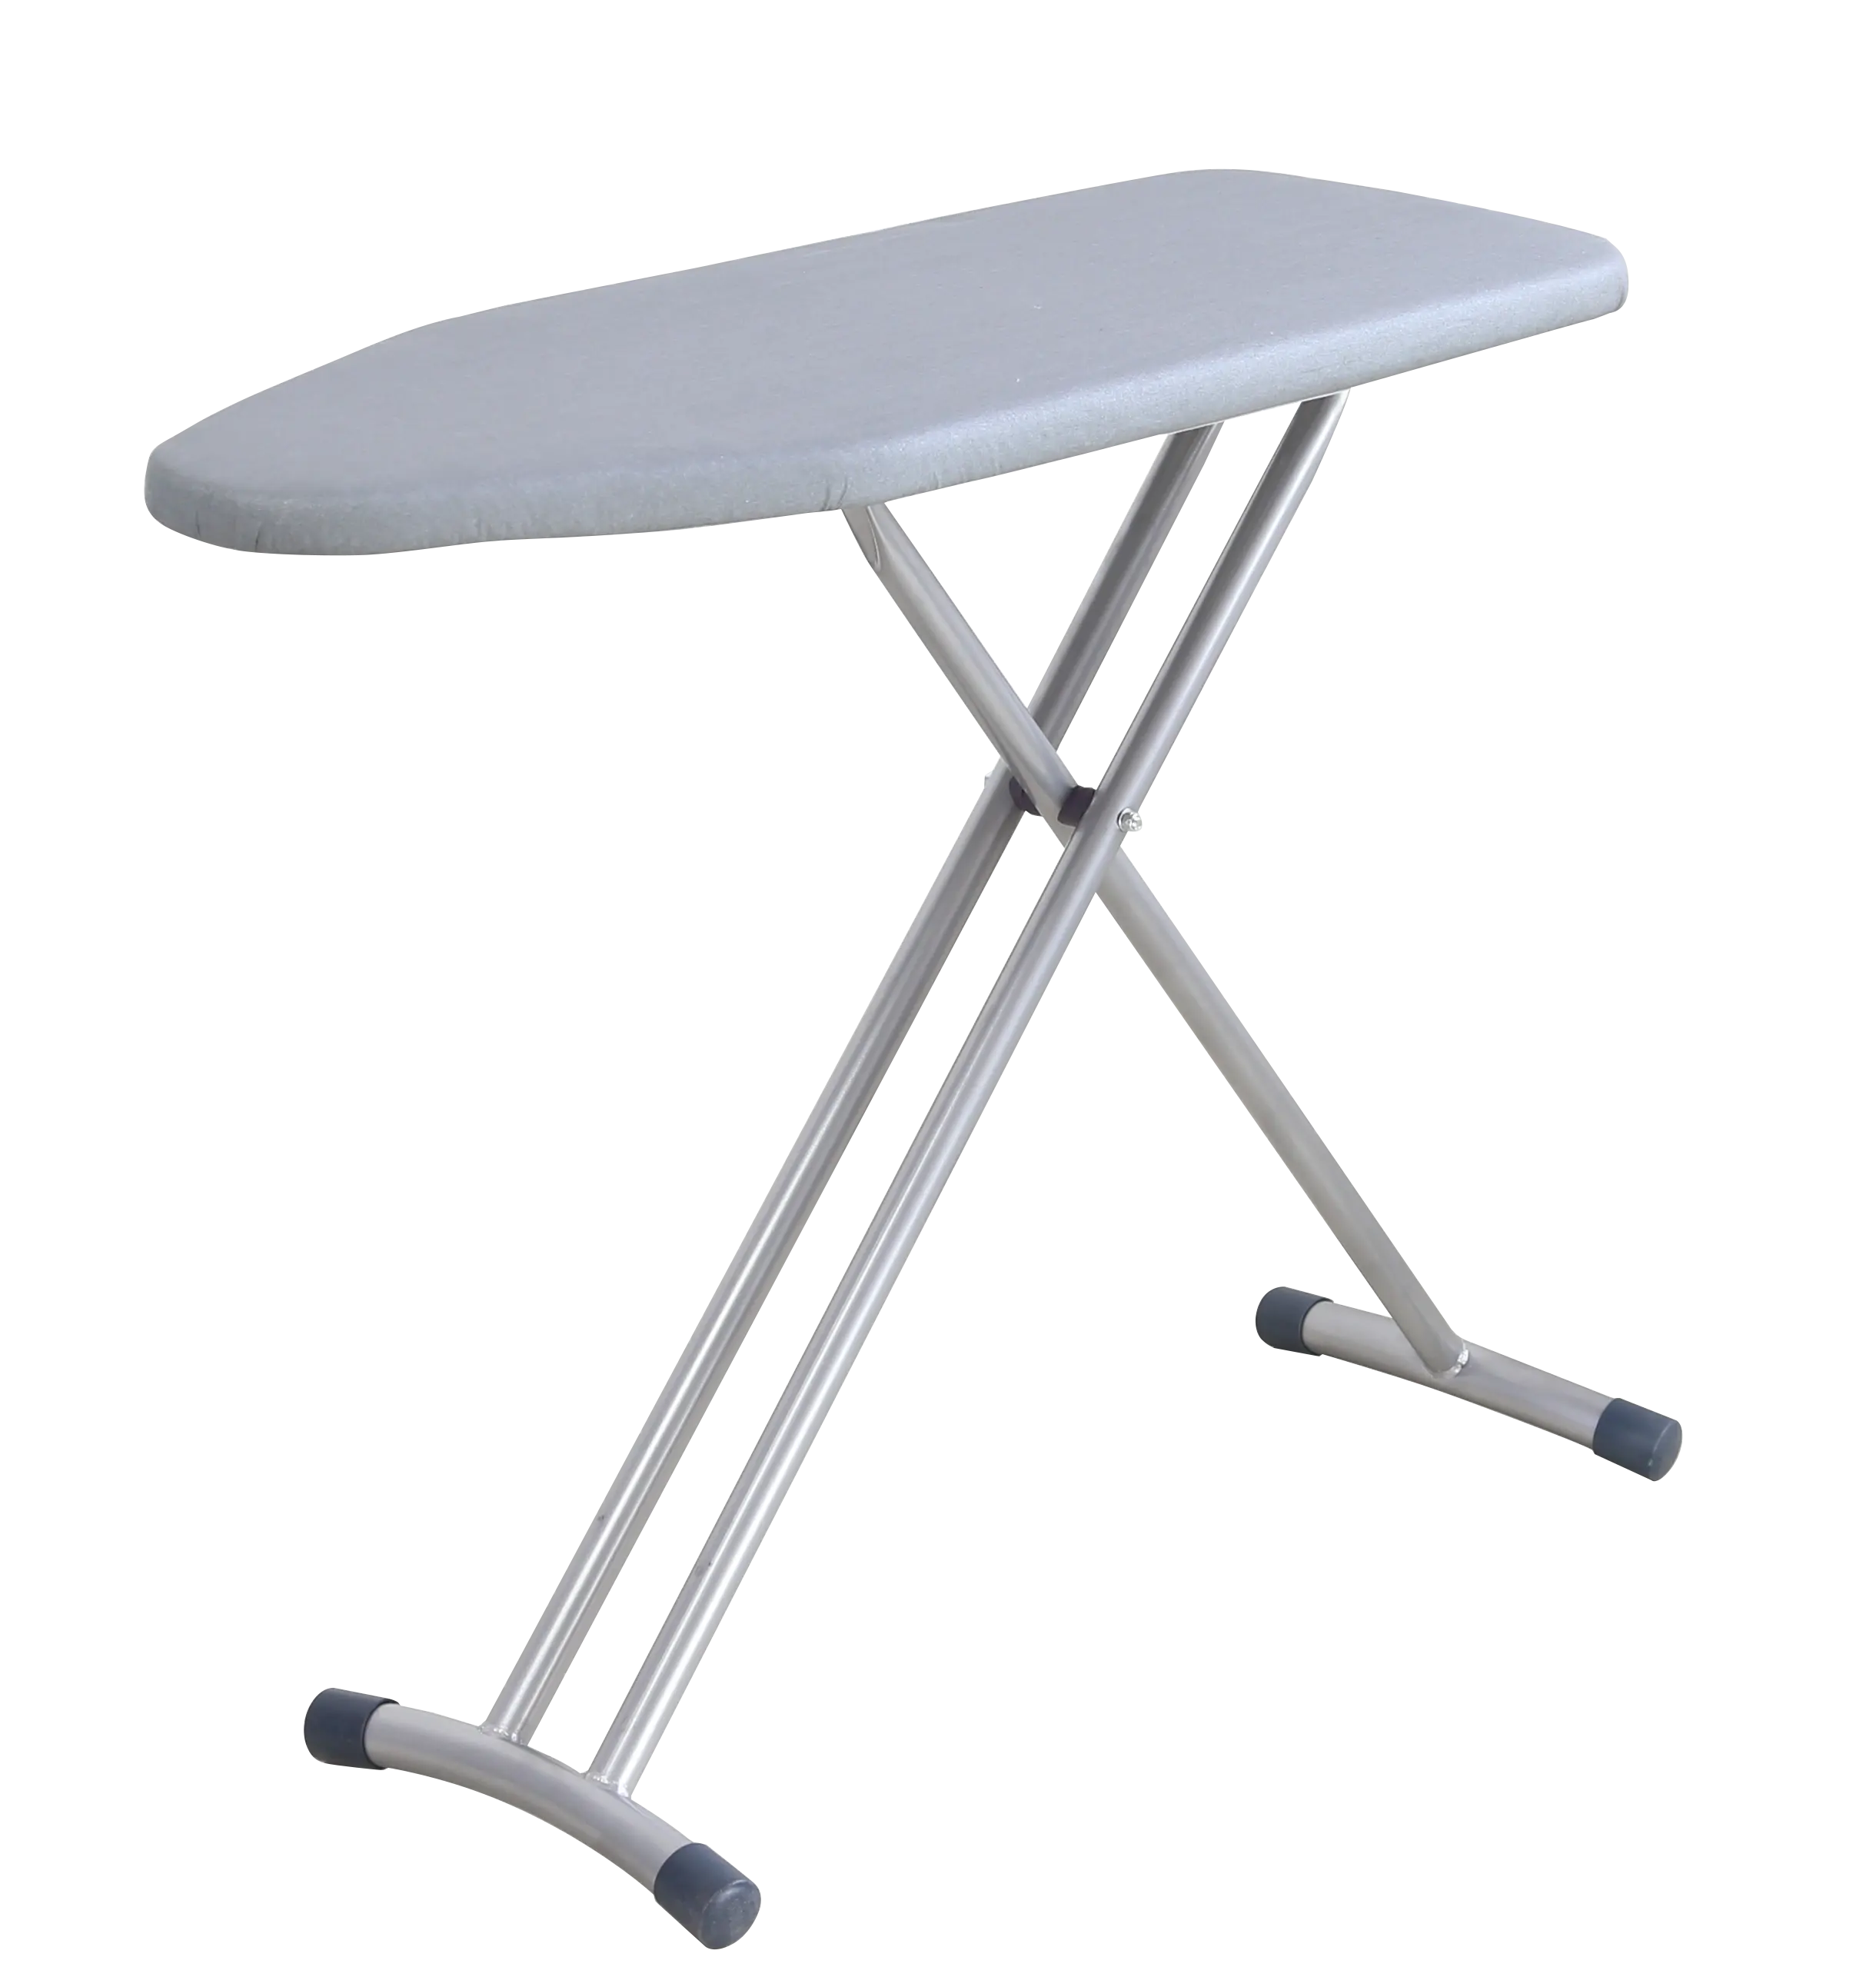 Ironing Board And Iron Set Ironing Board Cover And Pad With Long Ironing Board Color High Quality Health Thickening